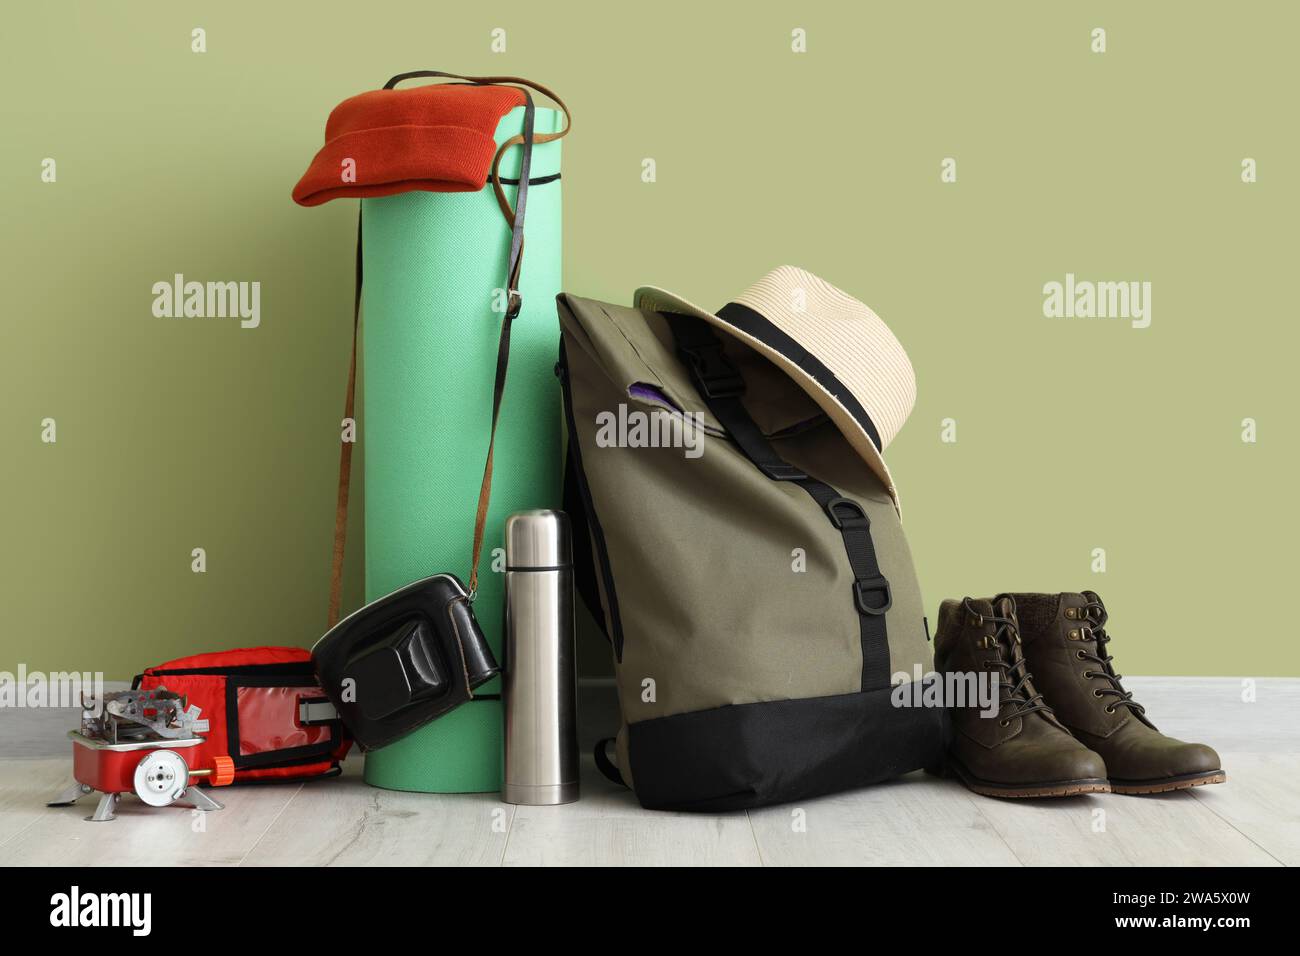 Set of camping equipment with backpack, portable stove, thermos and boots near green wall Stock Photo